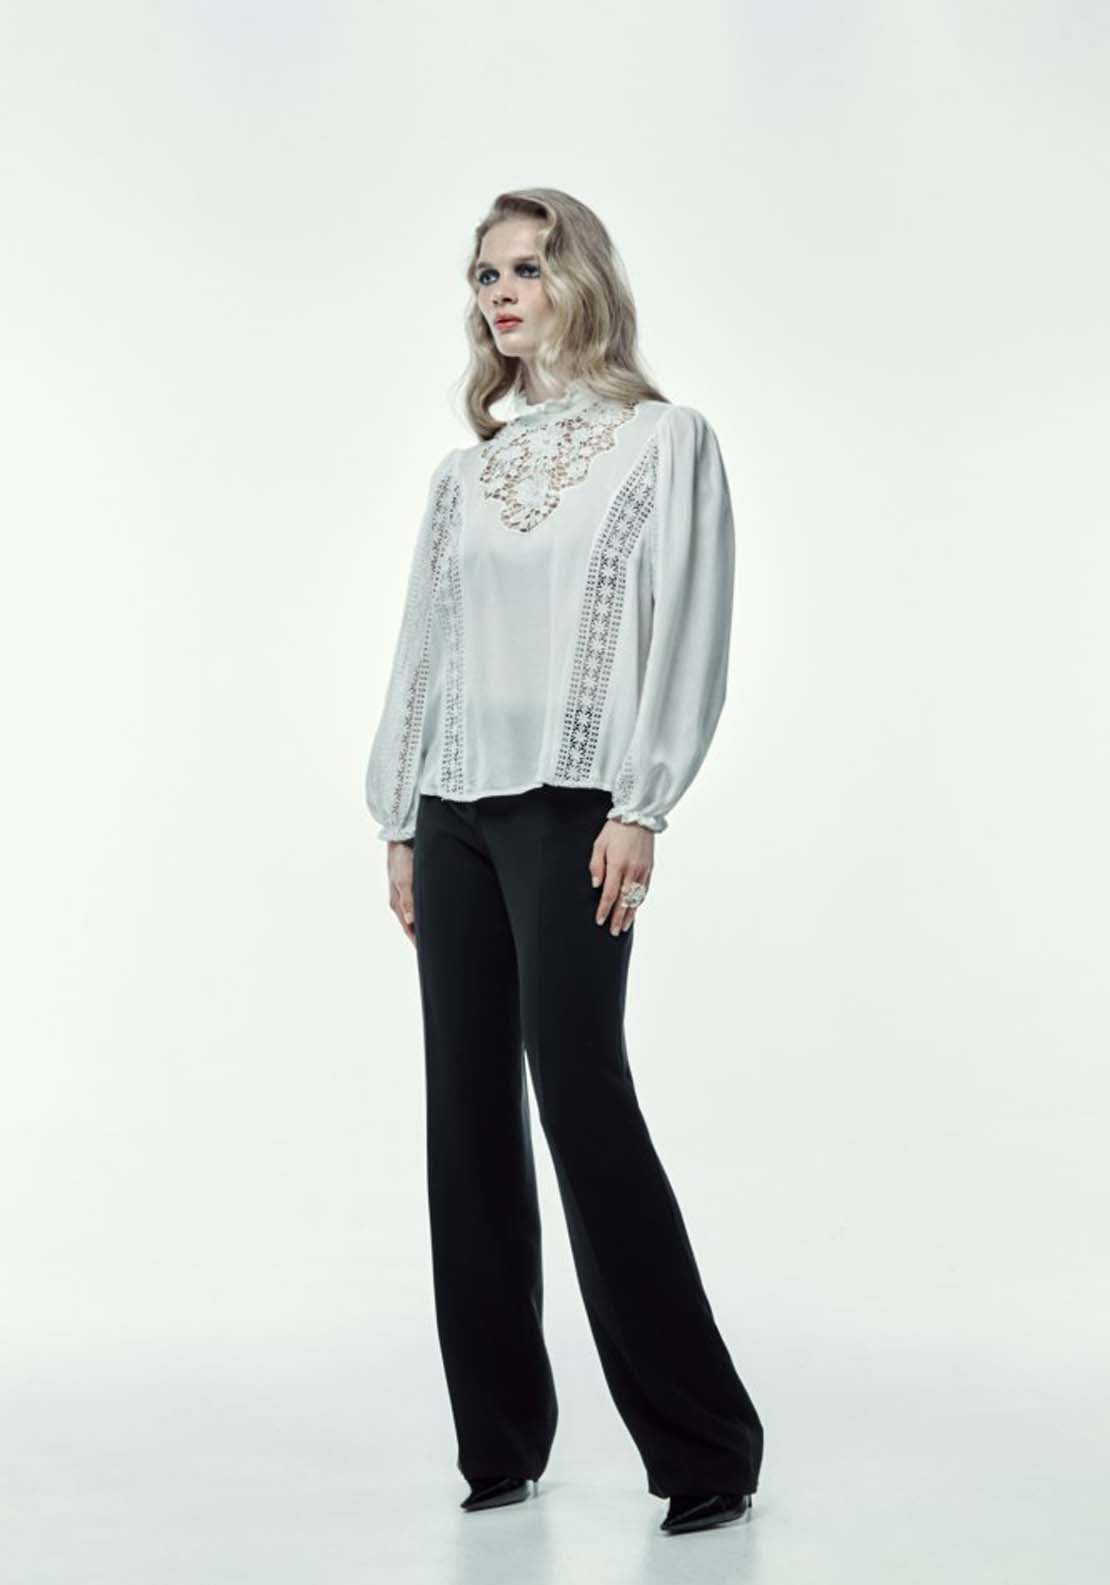 Sfera Long Sleeve Lace Romantic Blouse 2 Shaws Department Stores